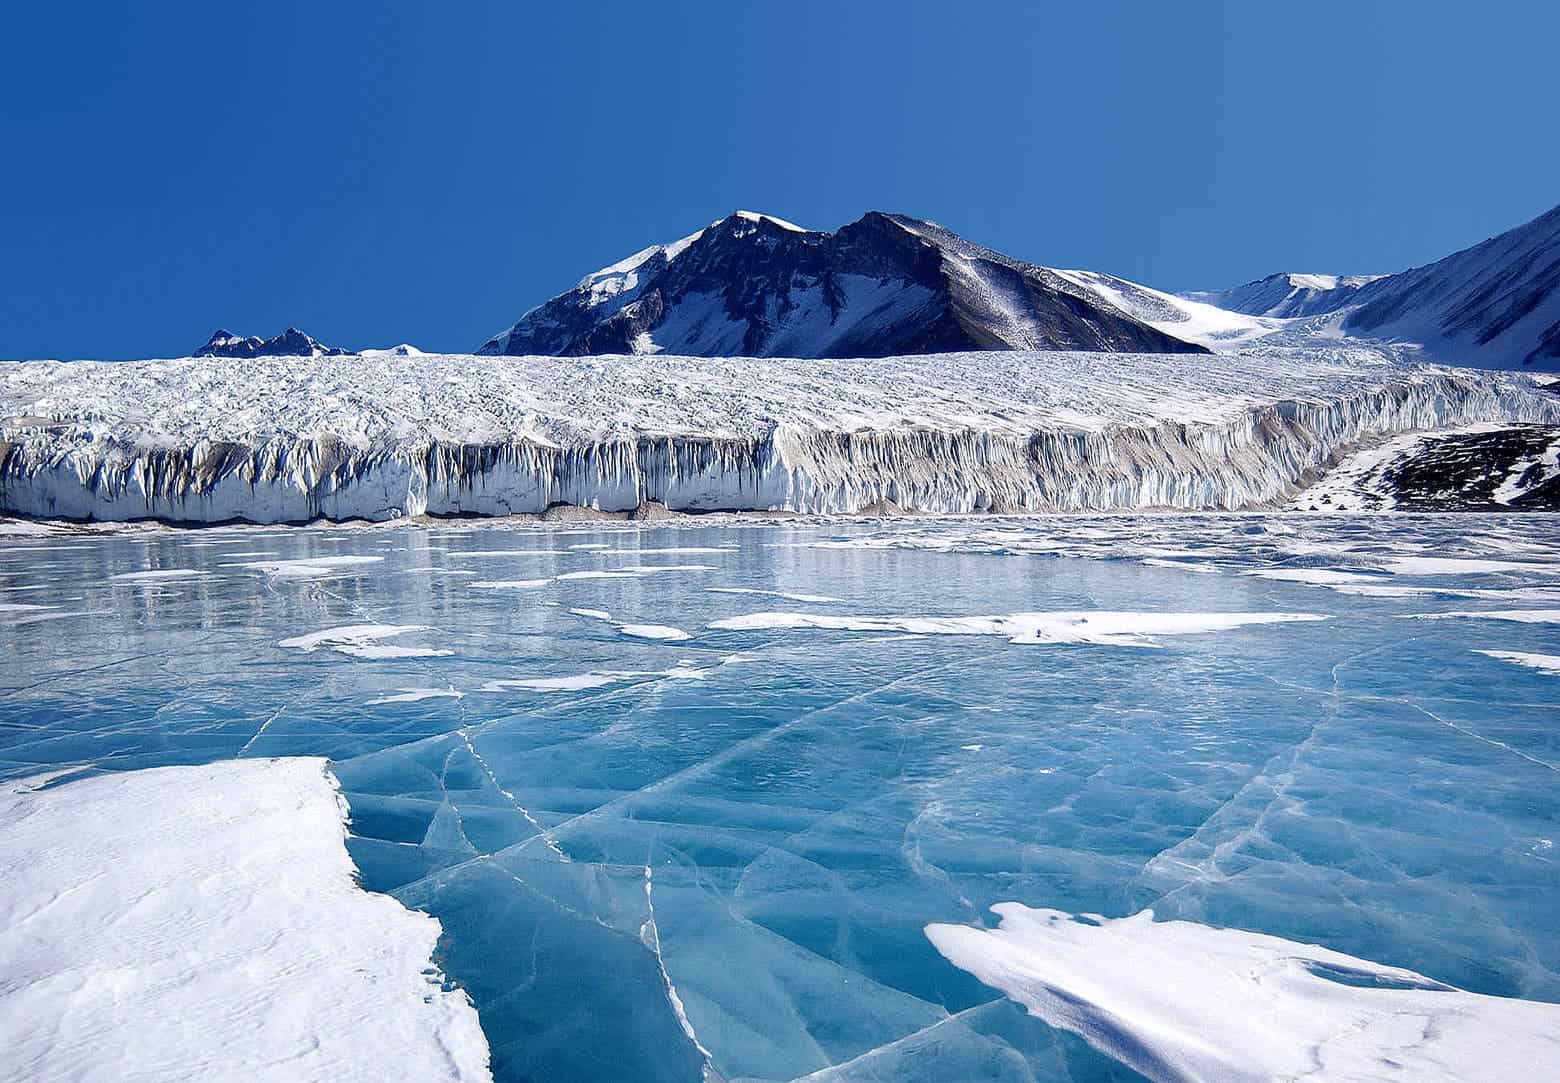 The blue ice covering Lake Fryxell, in the Transantarctic Mountains, comes from glacial meltwater from the Canada Glacier and other smaller glaciers. Image credits: Joe Mastroianni